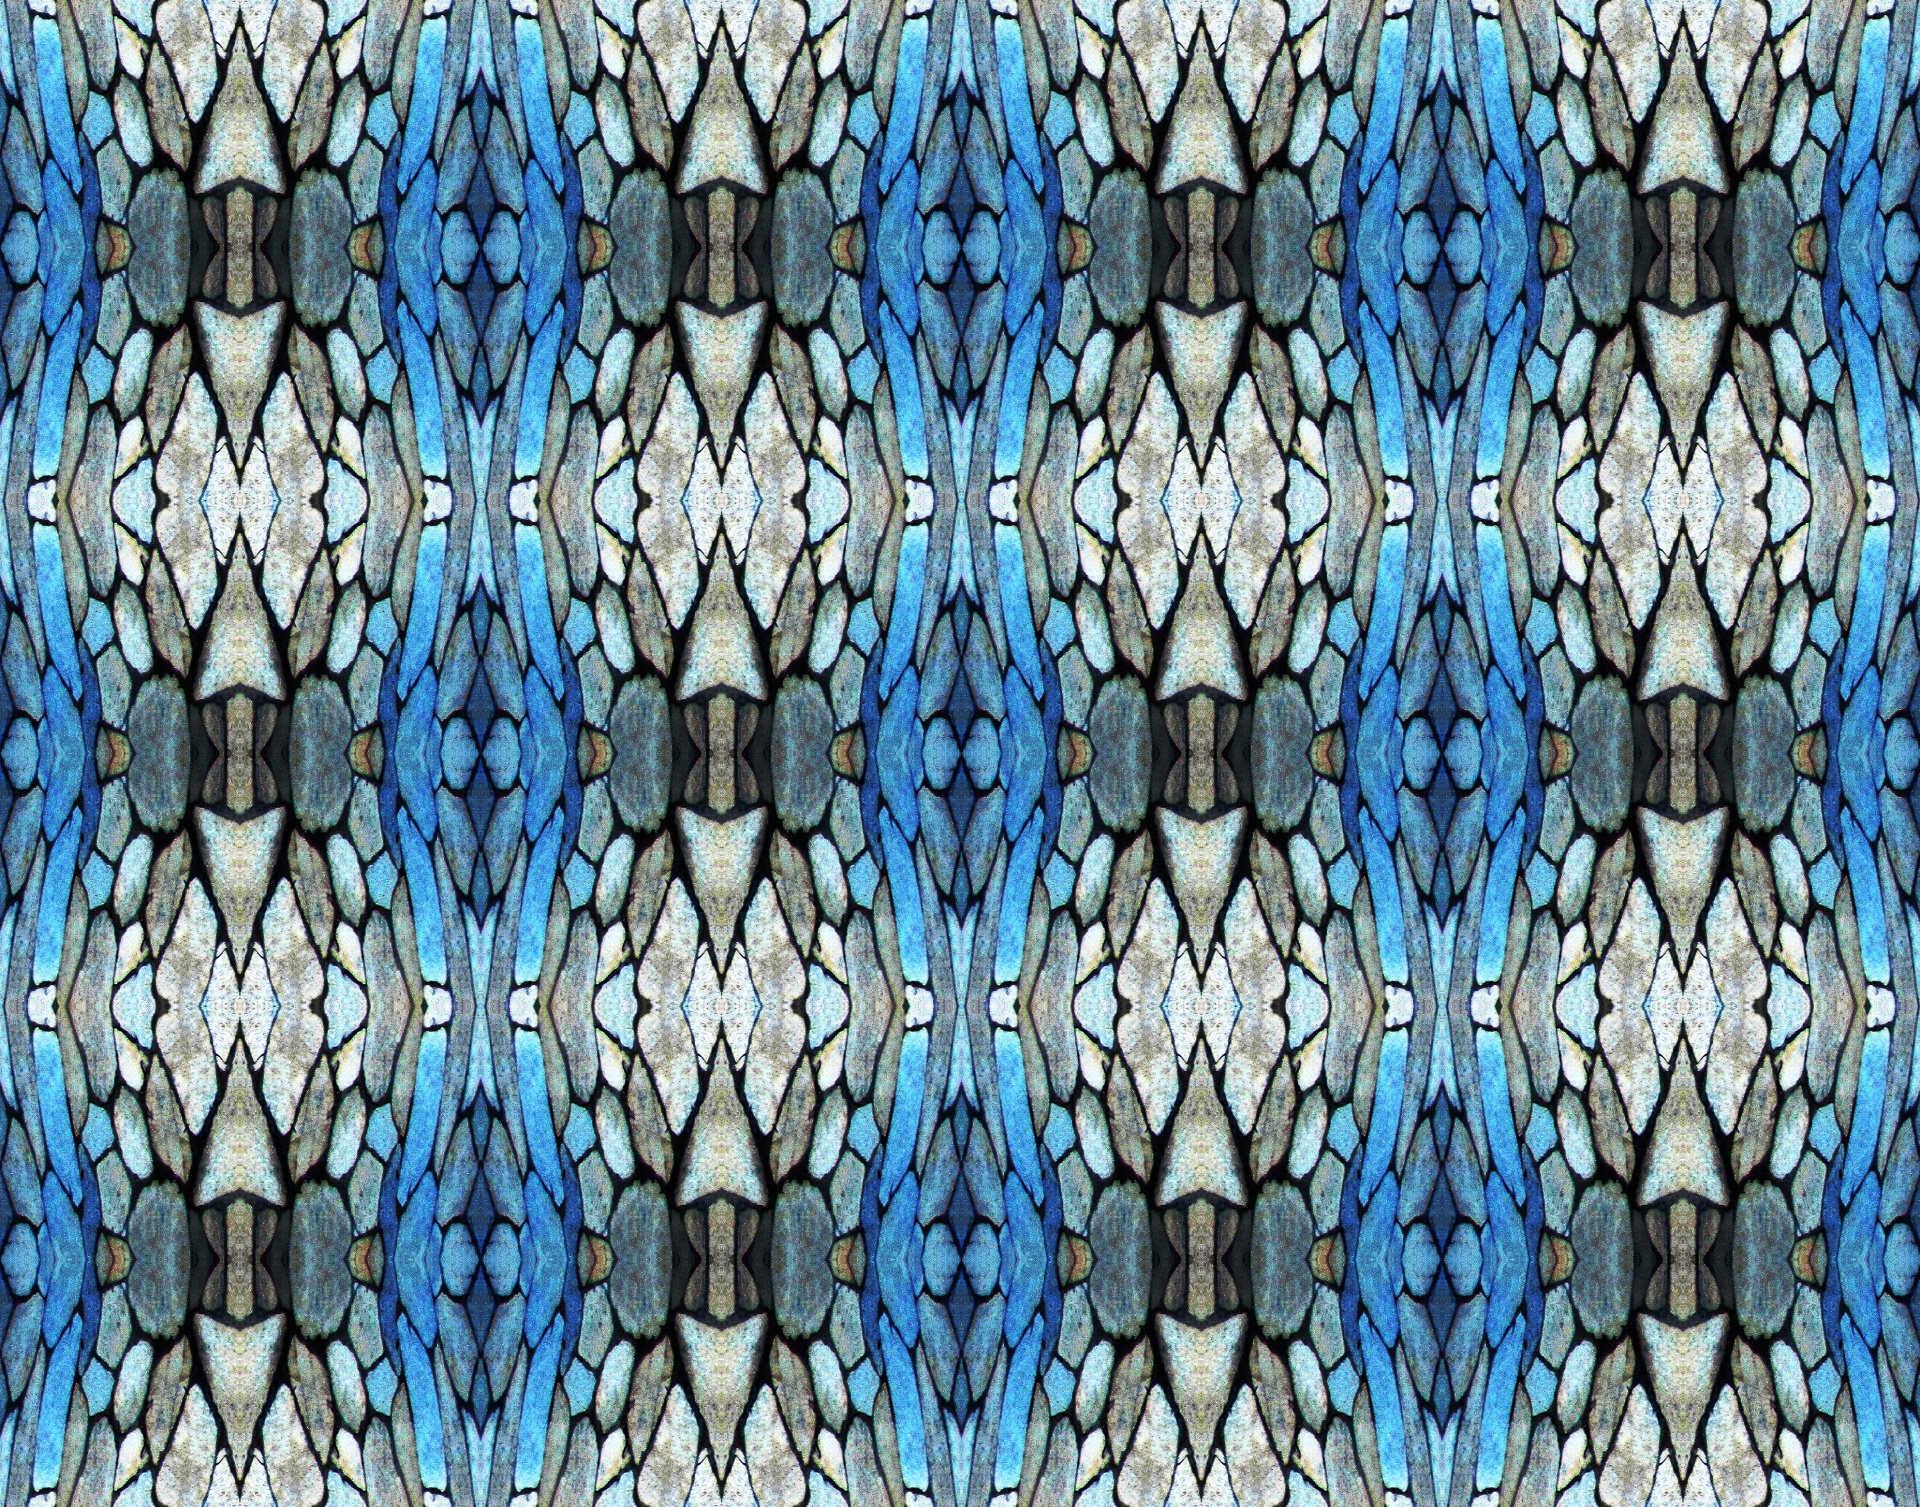 facets repeat pattern free photo